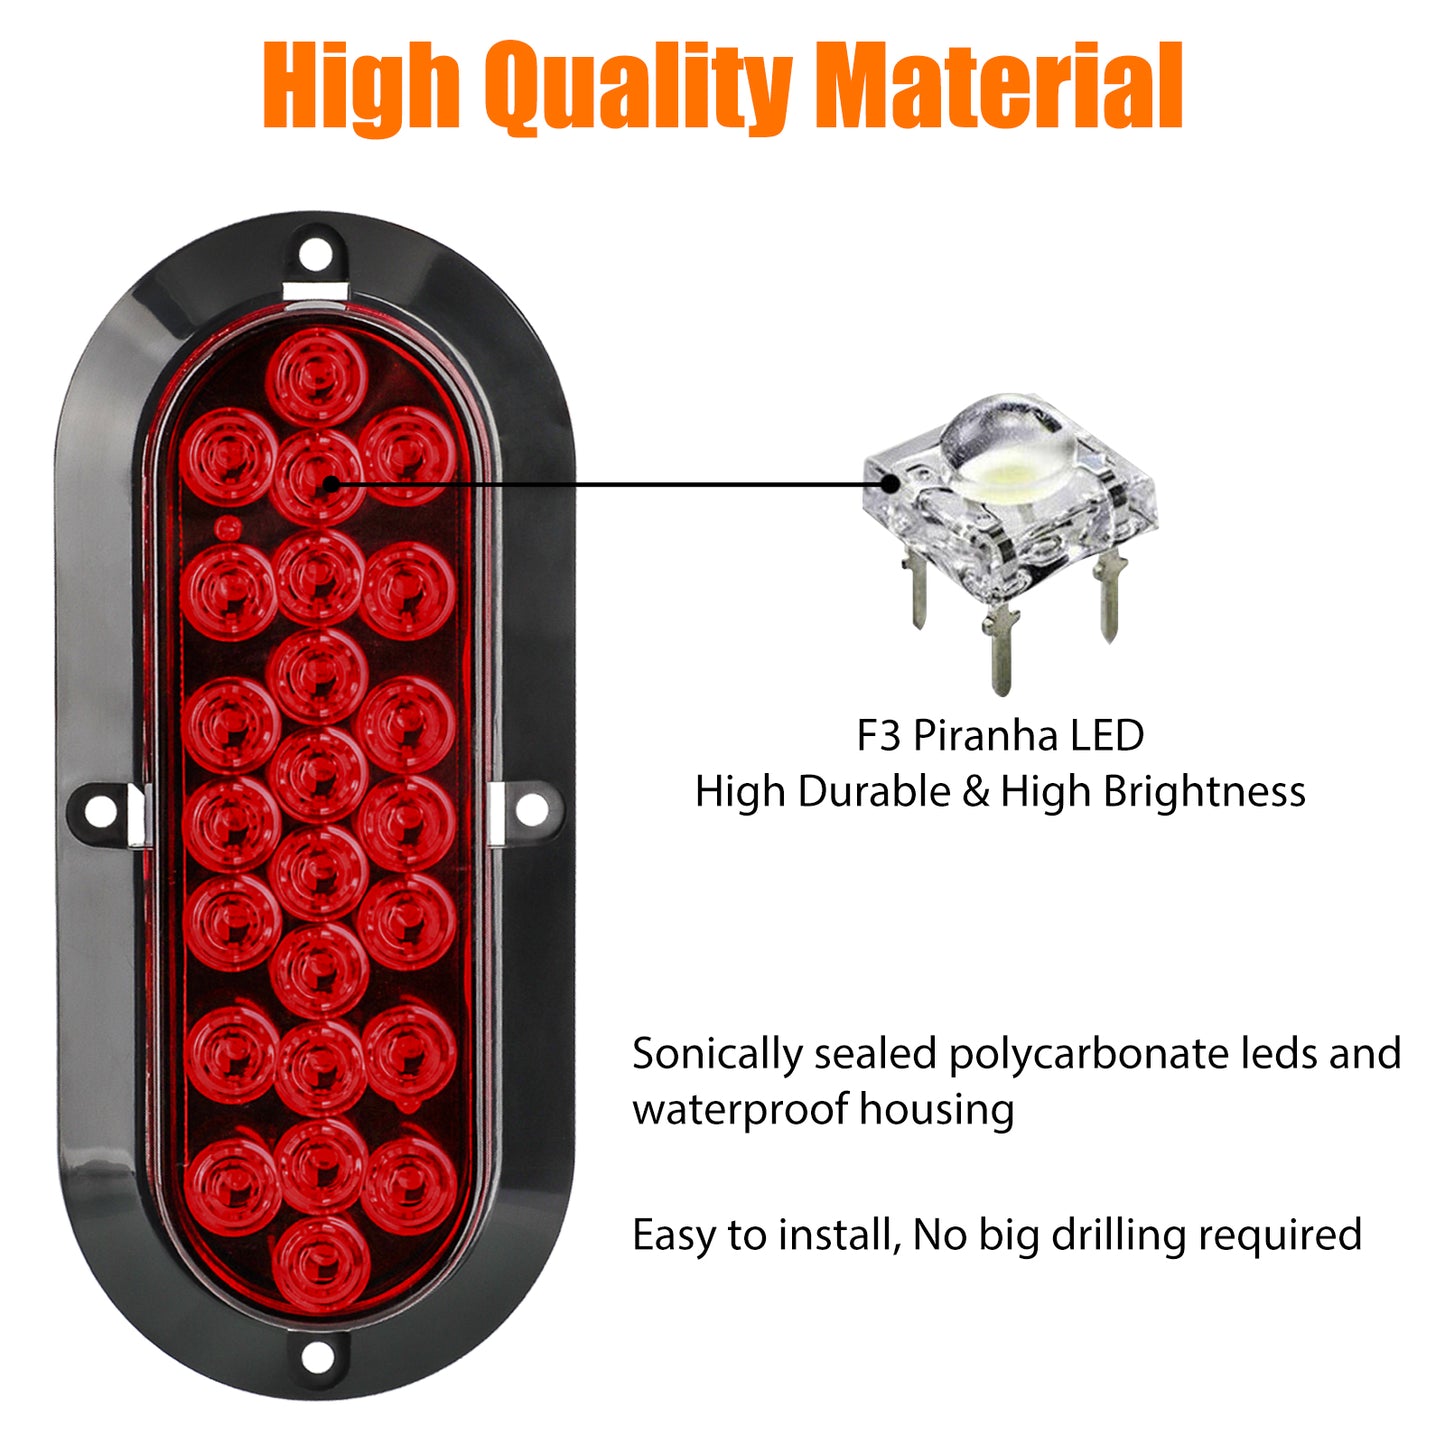 2pcs 6-Inch Red Oval Trailer Lights - 24 LED Stop Turn Tail Lights for for Trucks, trailers, tractors, horse trailers, travel trailers, dump Trucks, special vehicles, etc